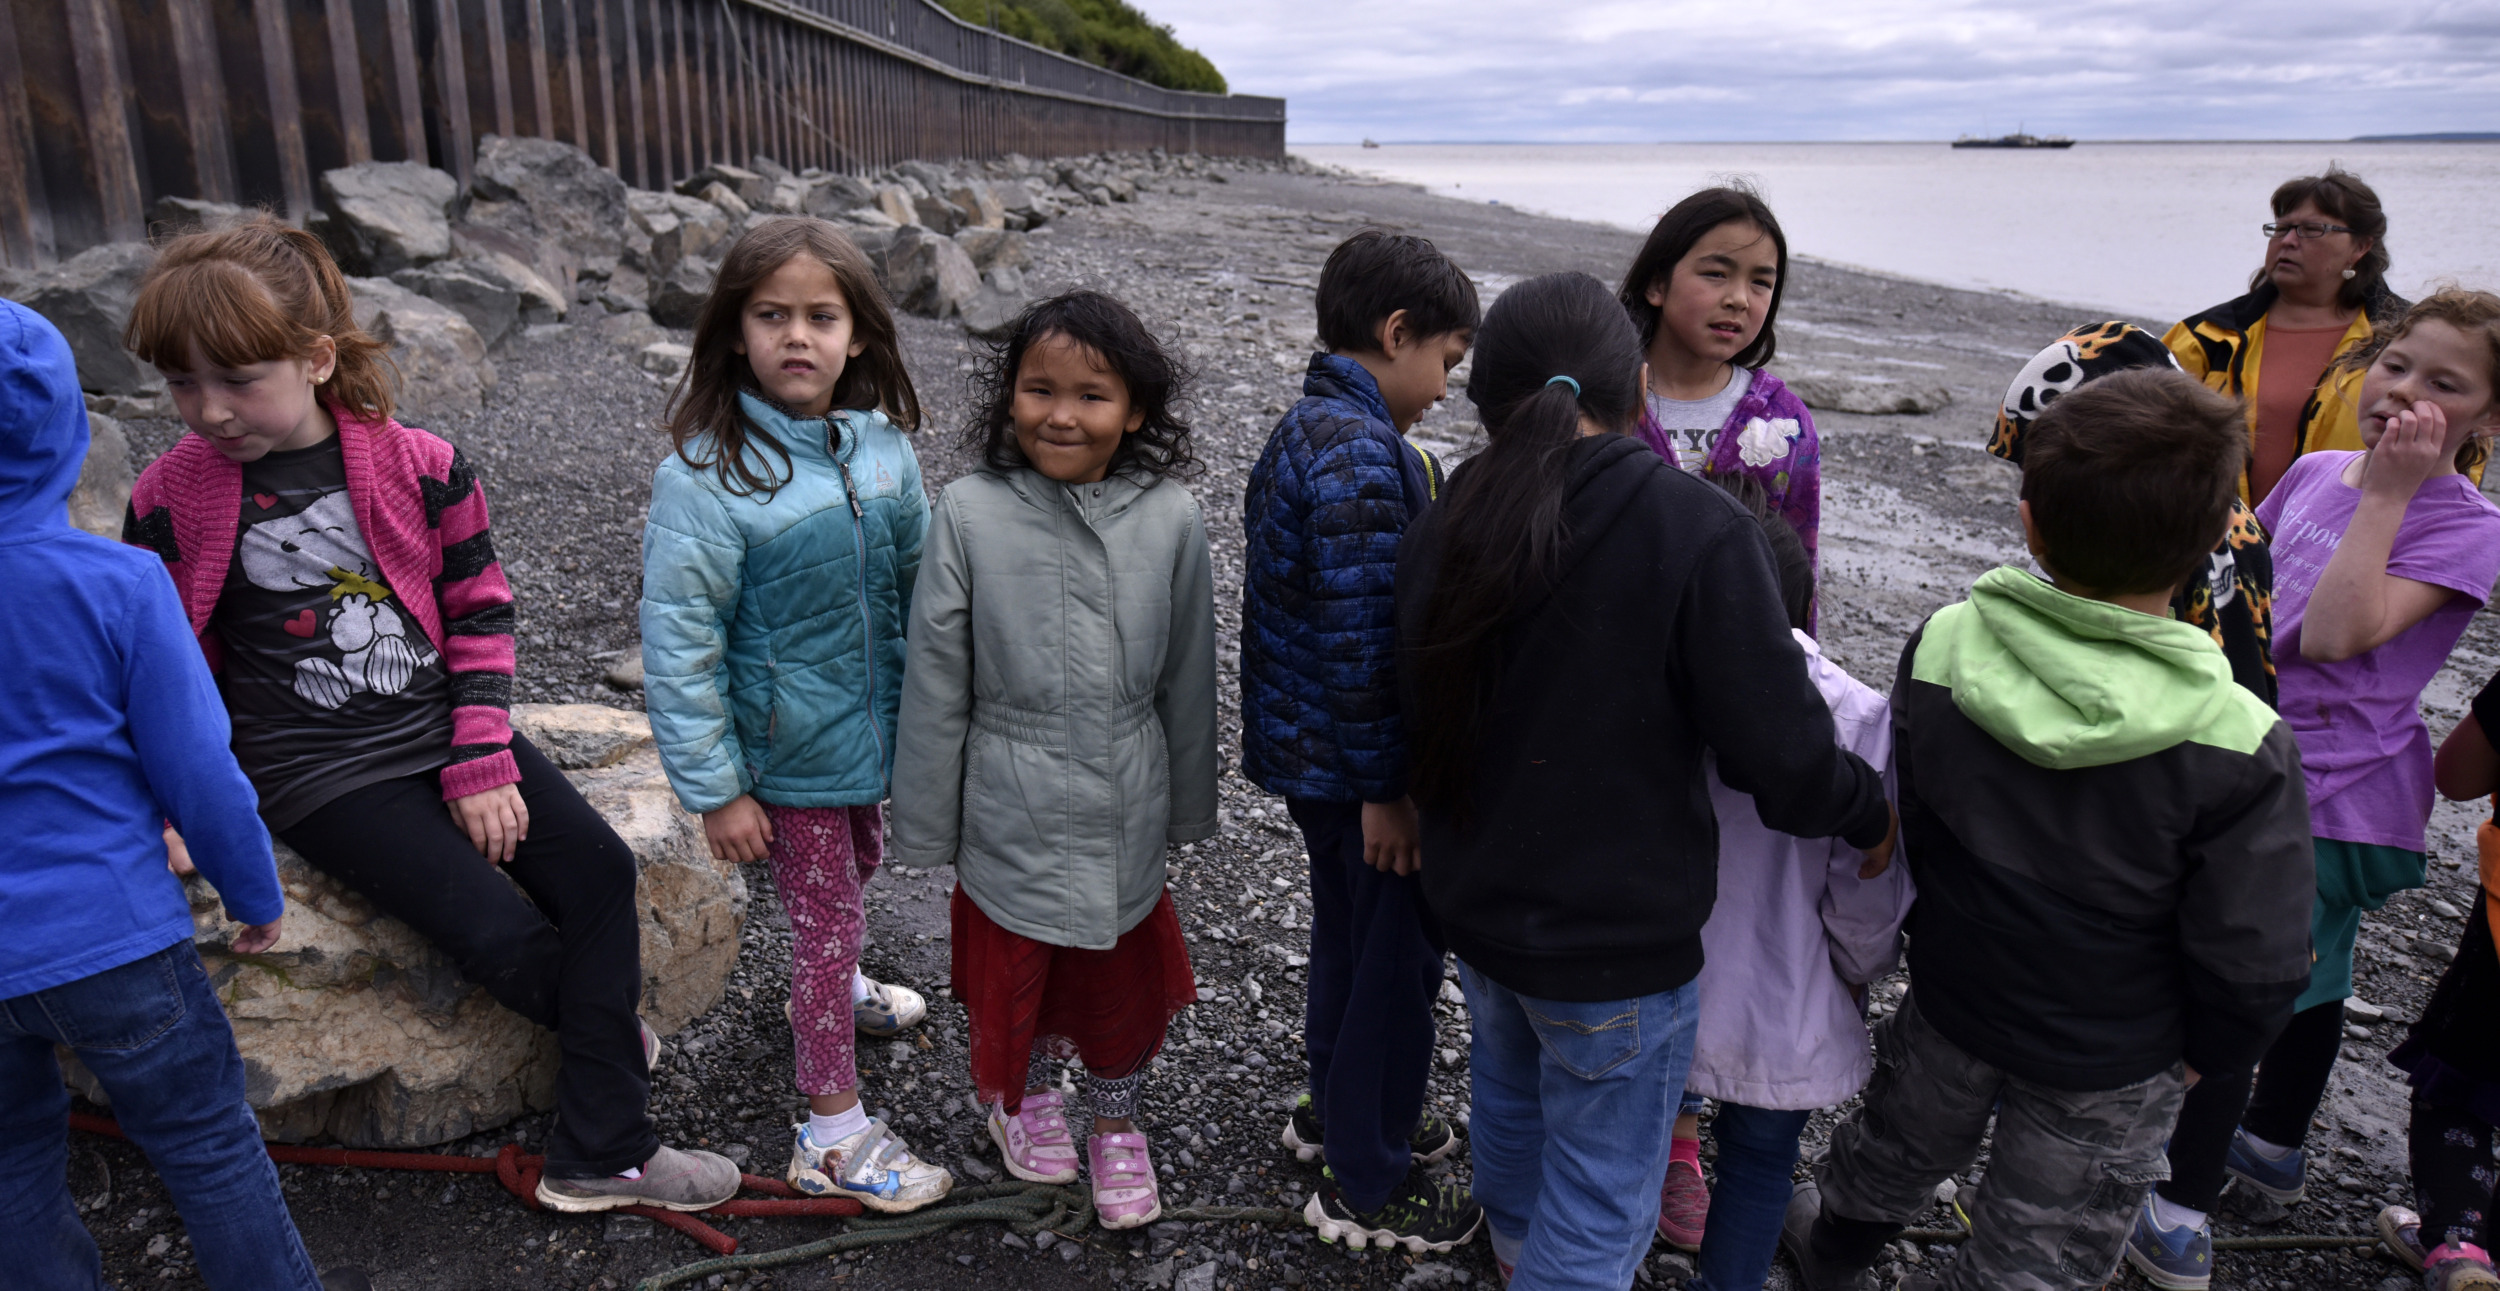 Native American afterschool programs: Several young children in winter coats stand with one adult on the shores of a lakeoutdoors